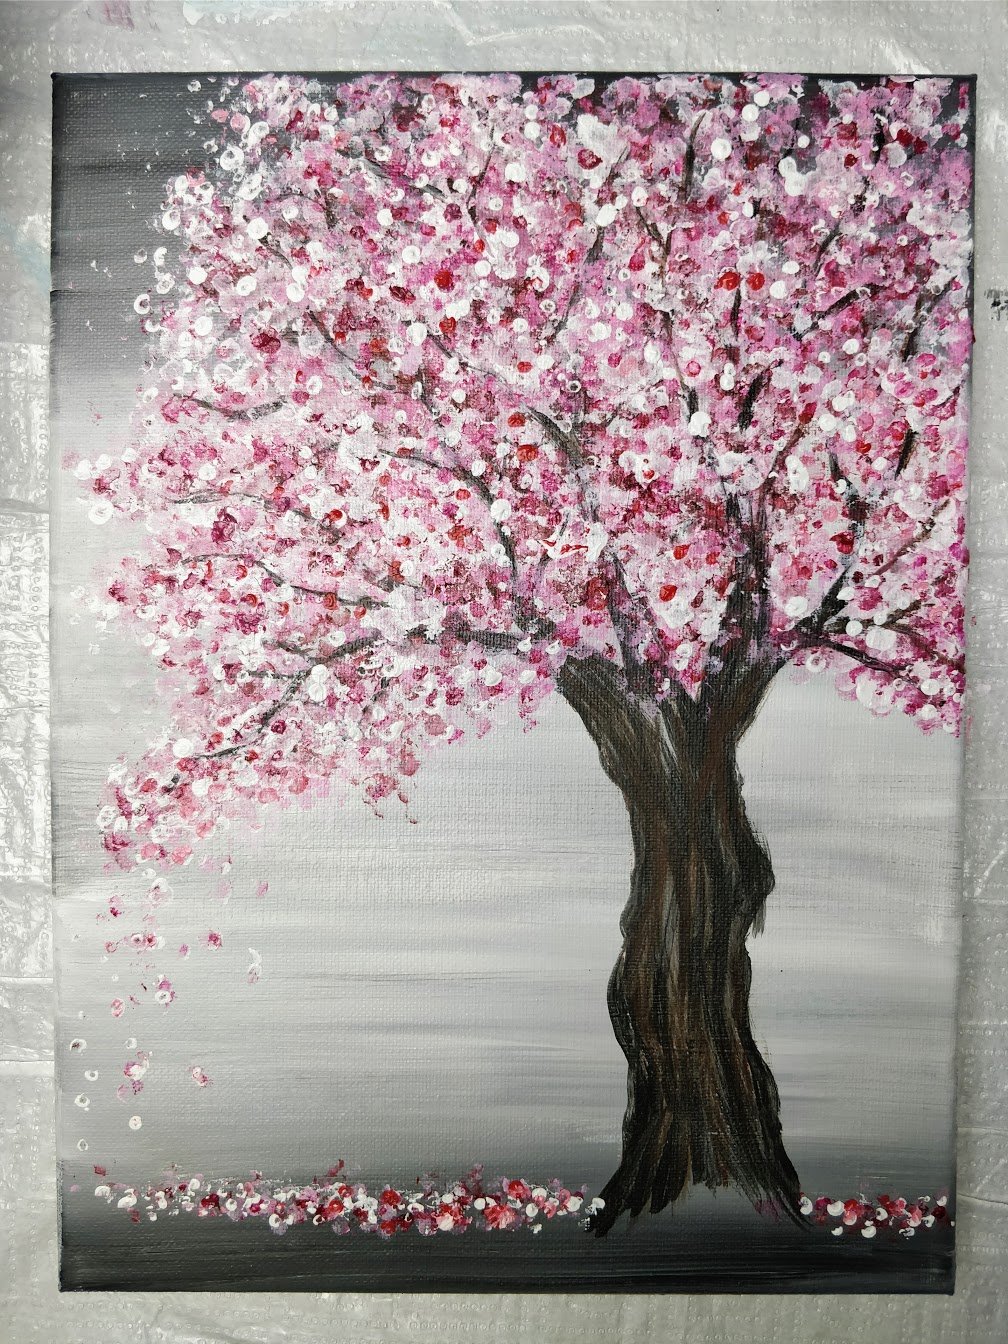 how to paint cherry blossom tree